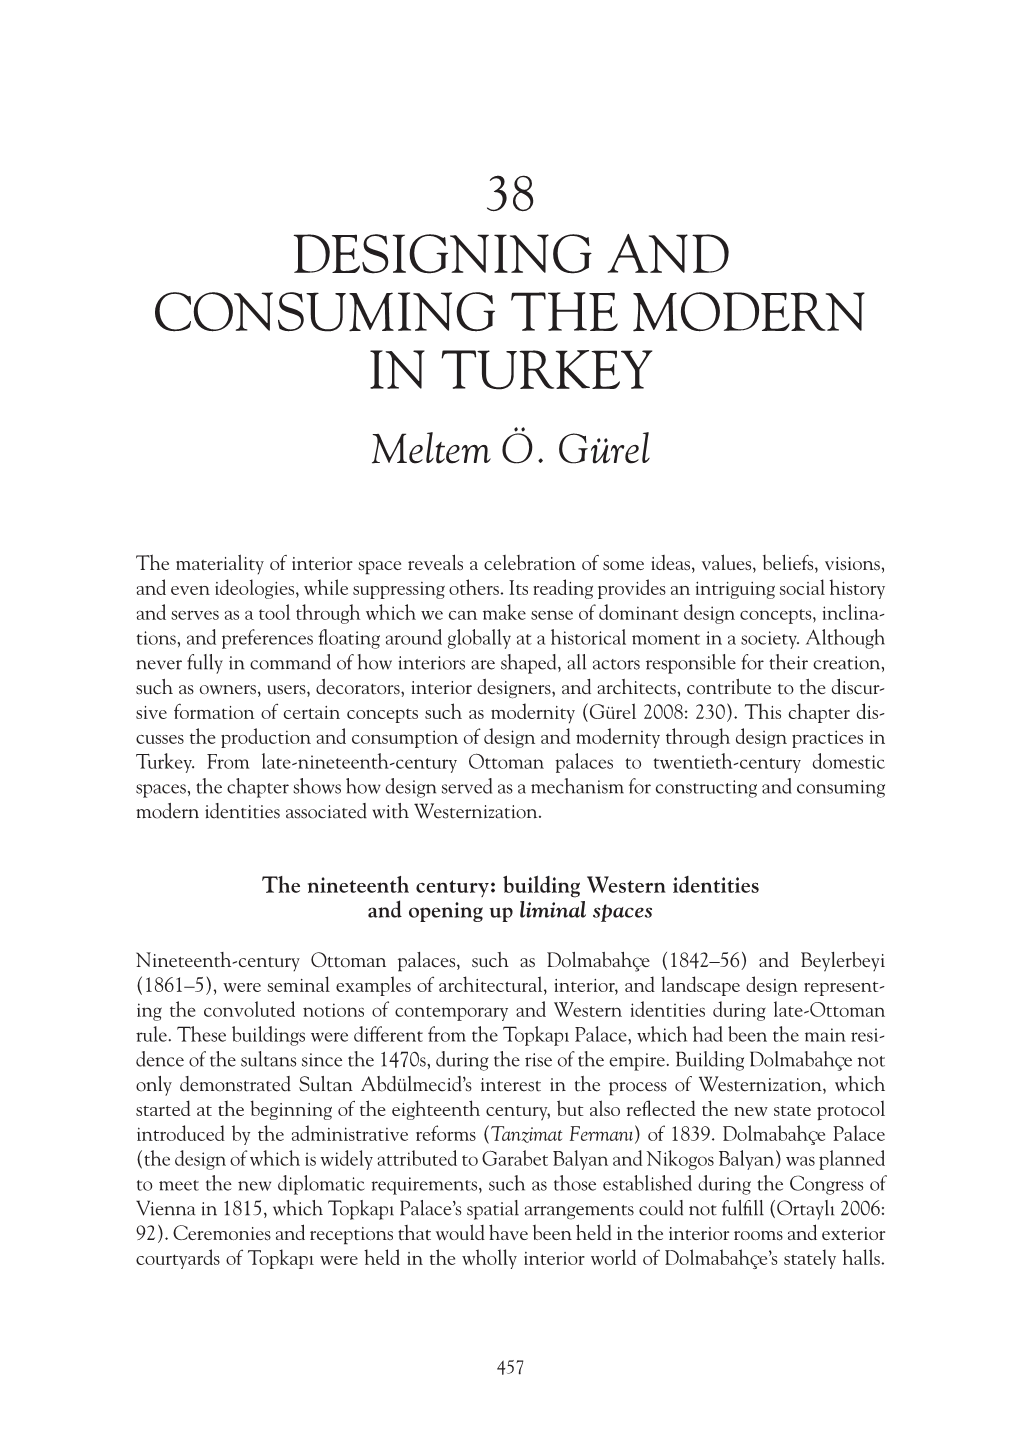 Designing and Consuming the Modern in Turkey